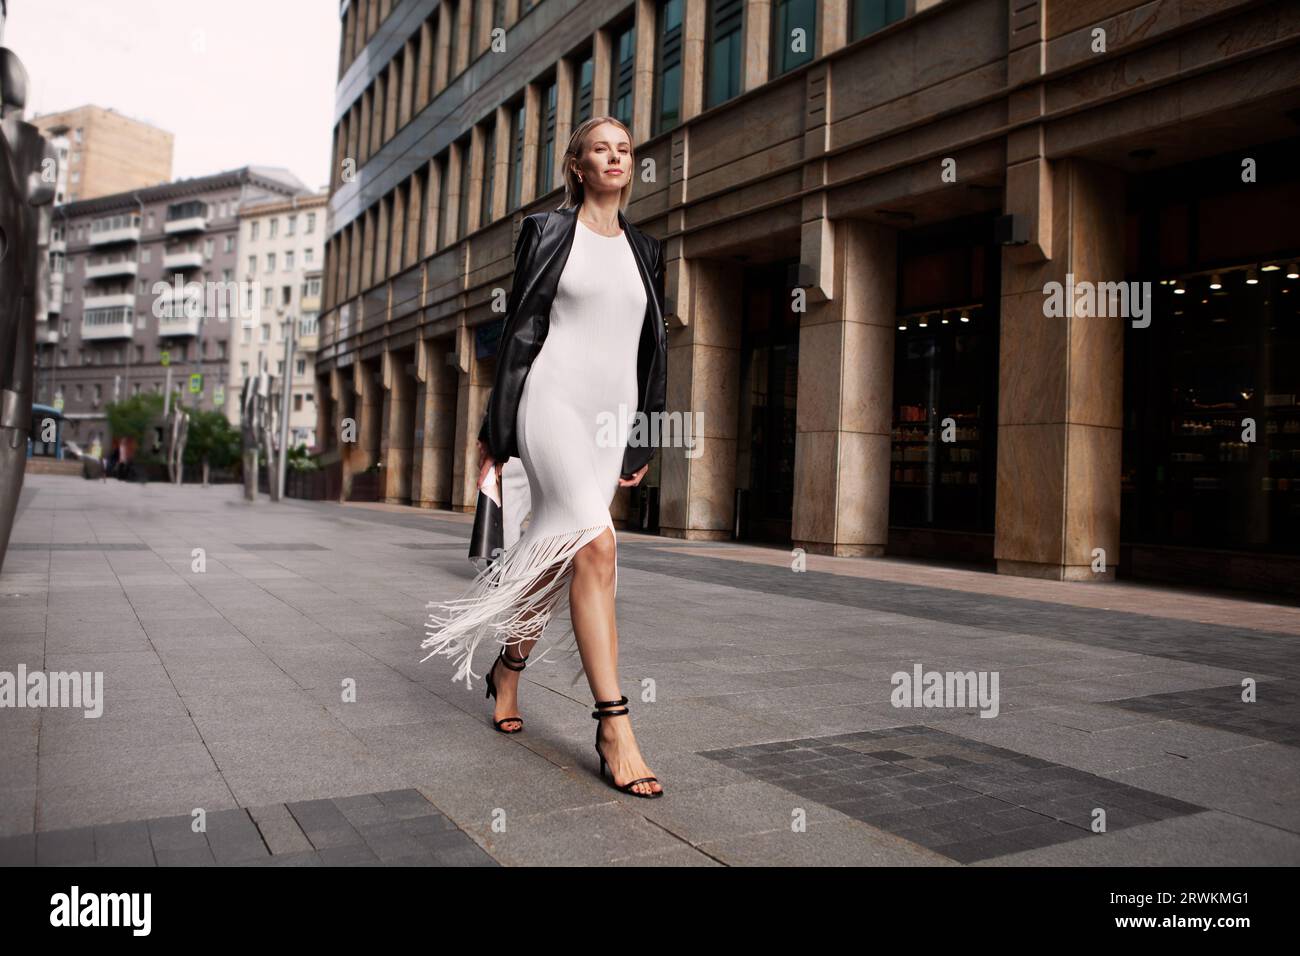 Full length fashionable blonde woman walking city street in chic attire with building in background. Young female model wears white fringed dress, bla Stock Photo